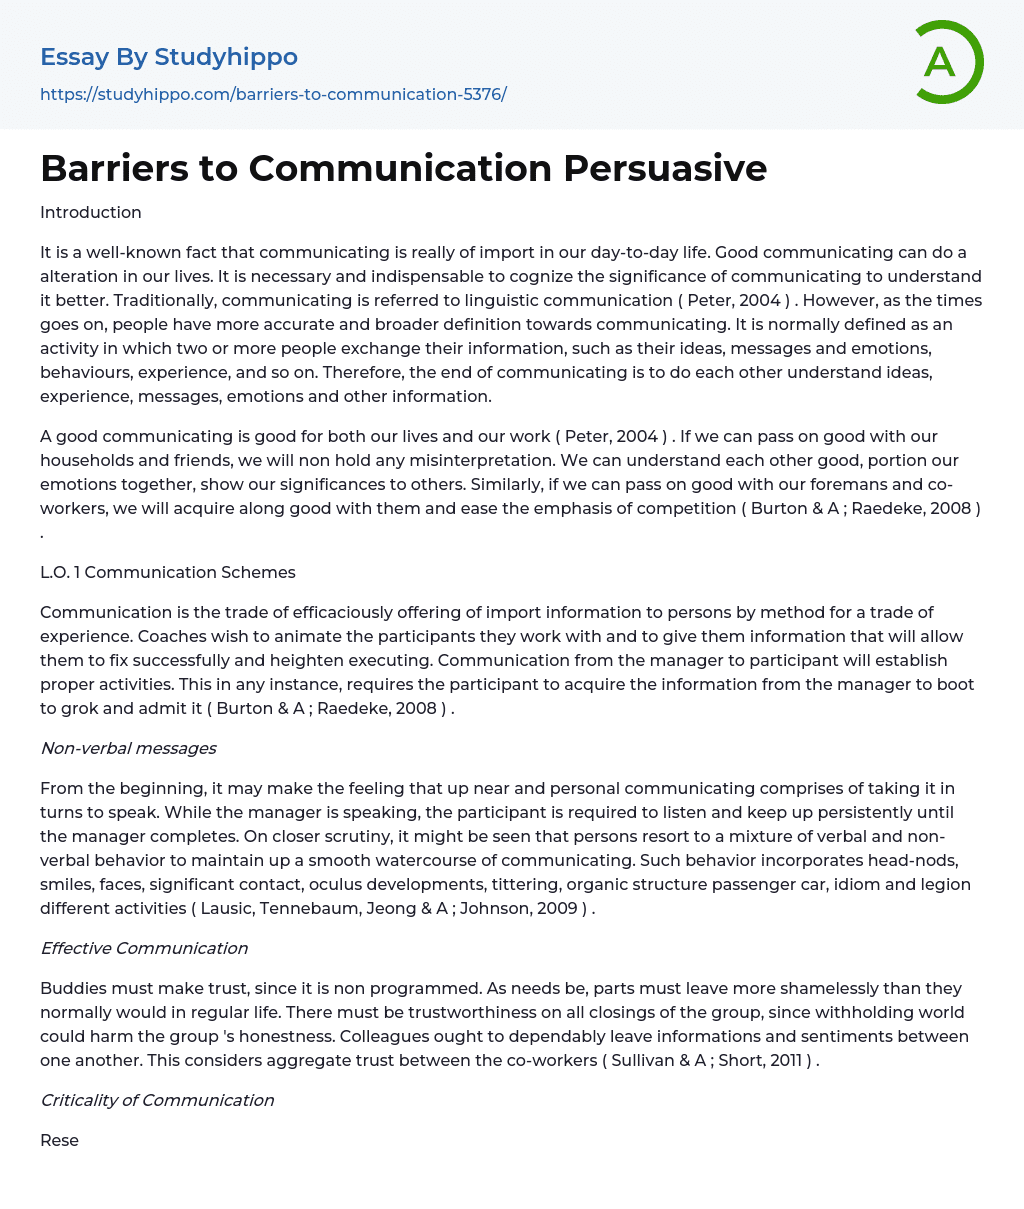 Barriers to Communication Persuasive Essay Example